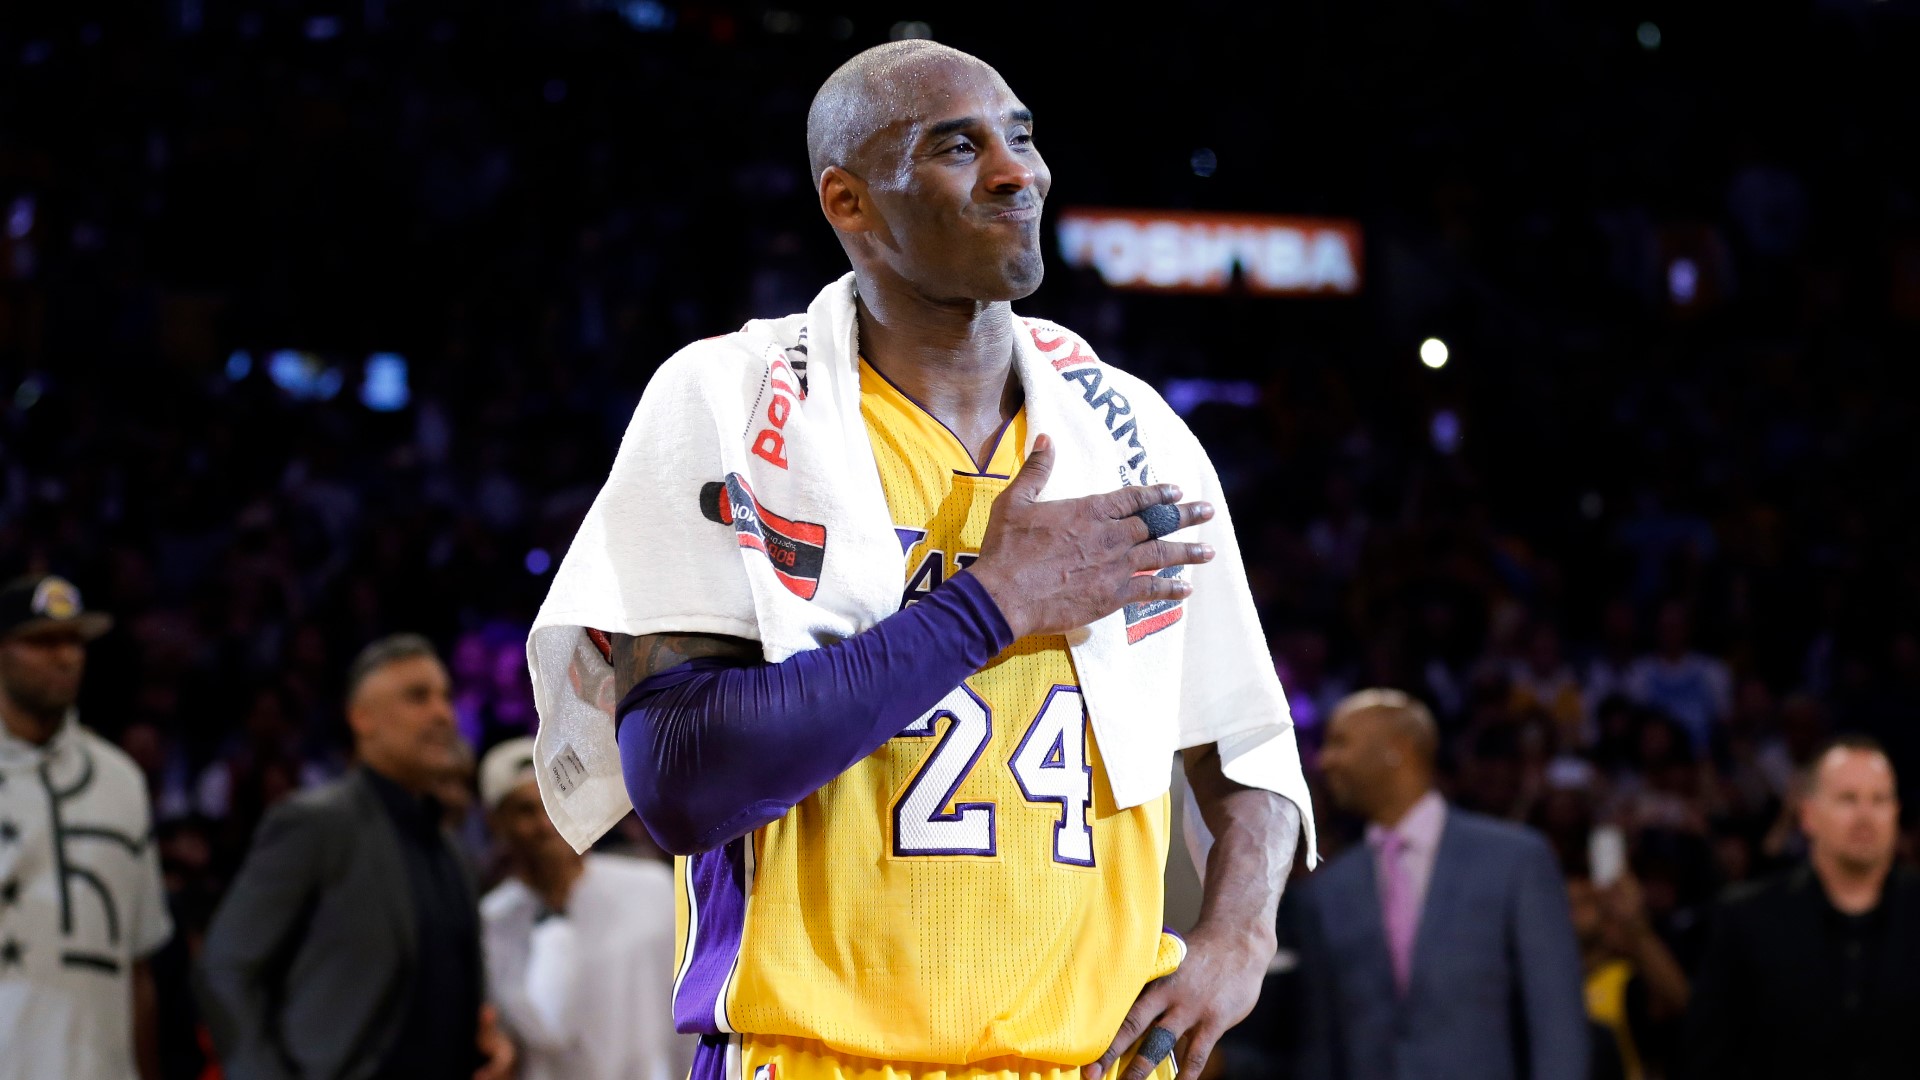 Los Angeles Lakers' Kobe Bryant pounds his chest after the last NBA basketball game of his career